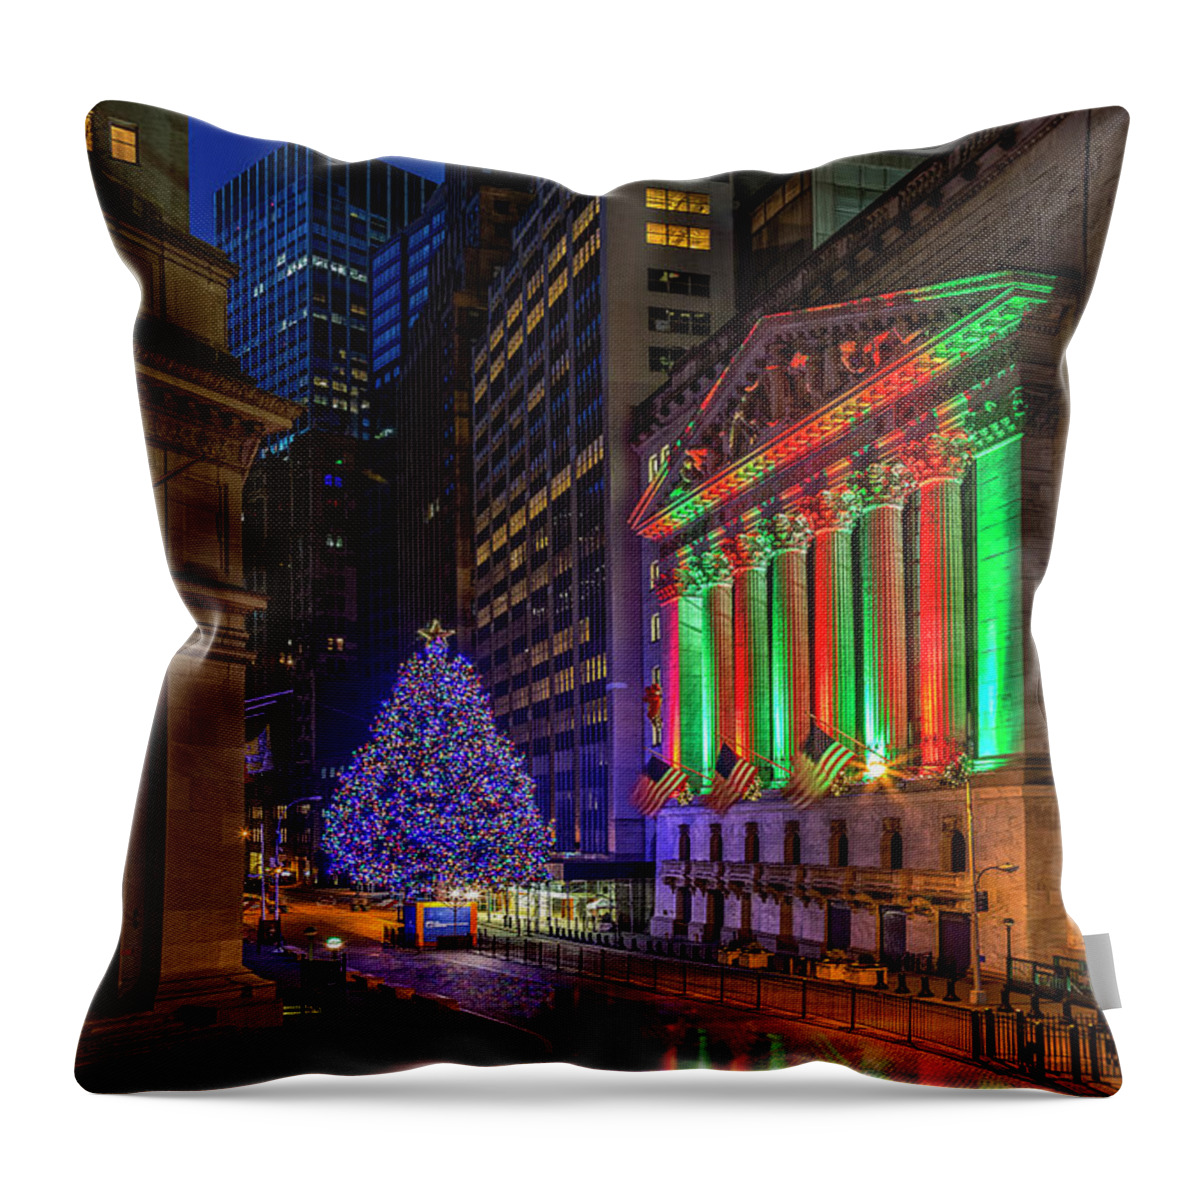 Wall Street Throw Pillow featuring the photograph New York City Stock Exchange Wall Street NYSE by Susan Candelario